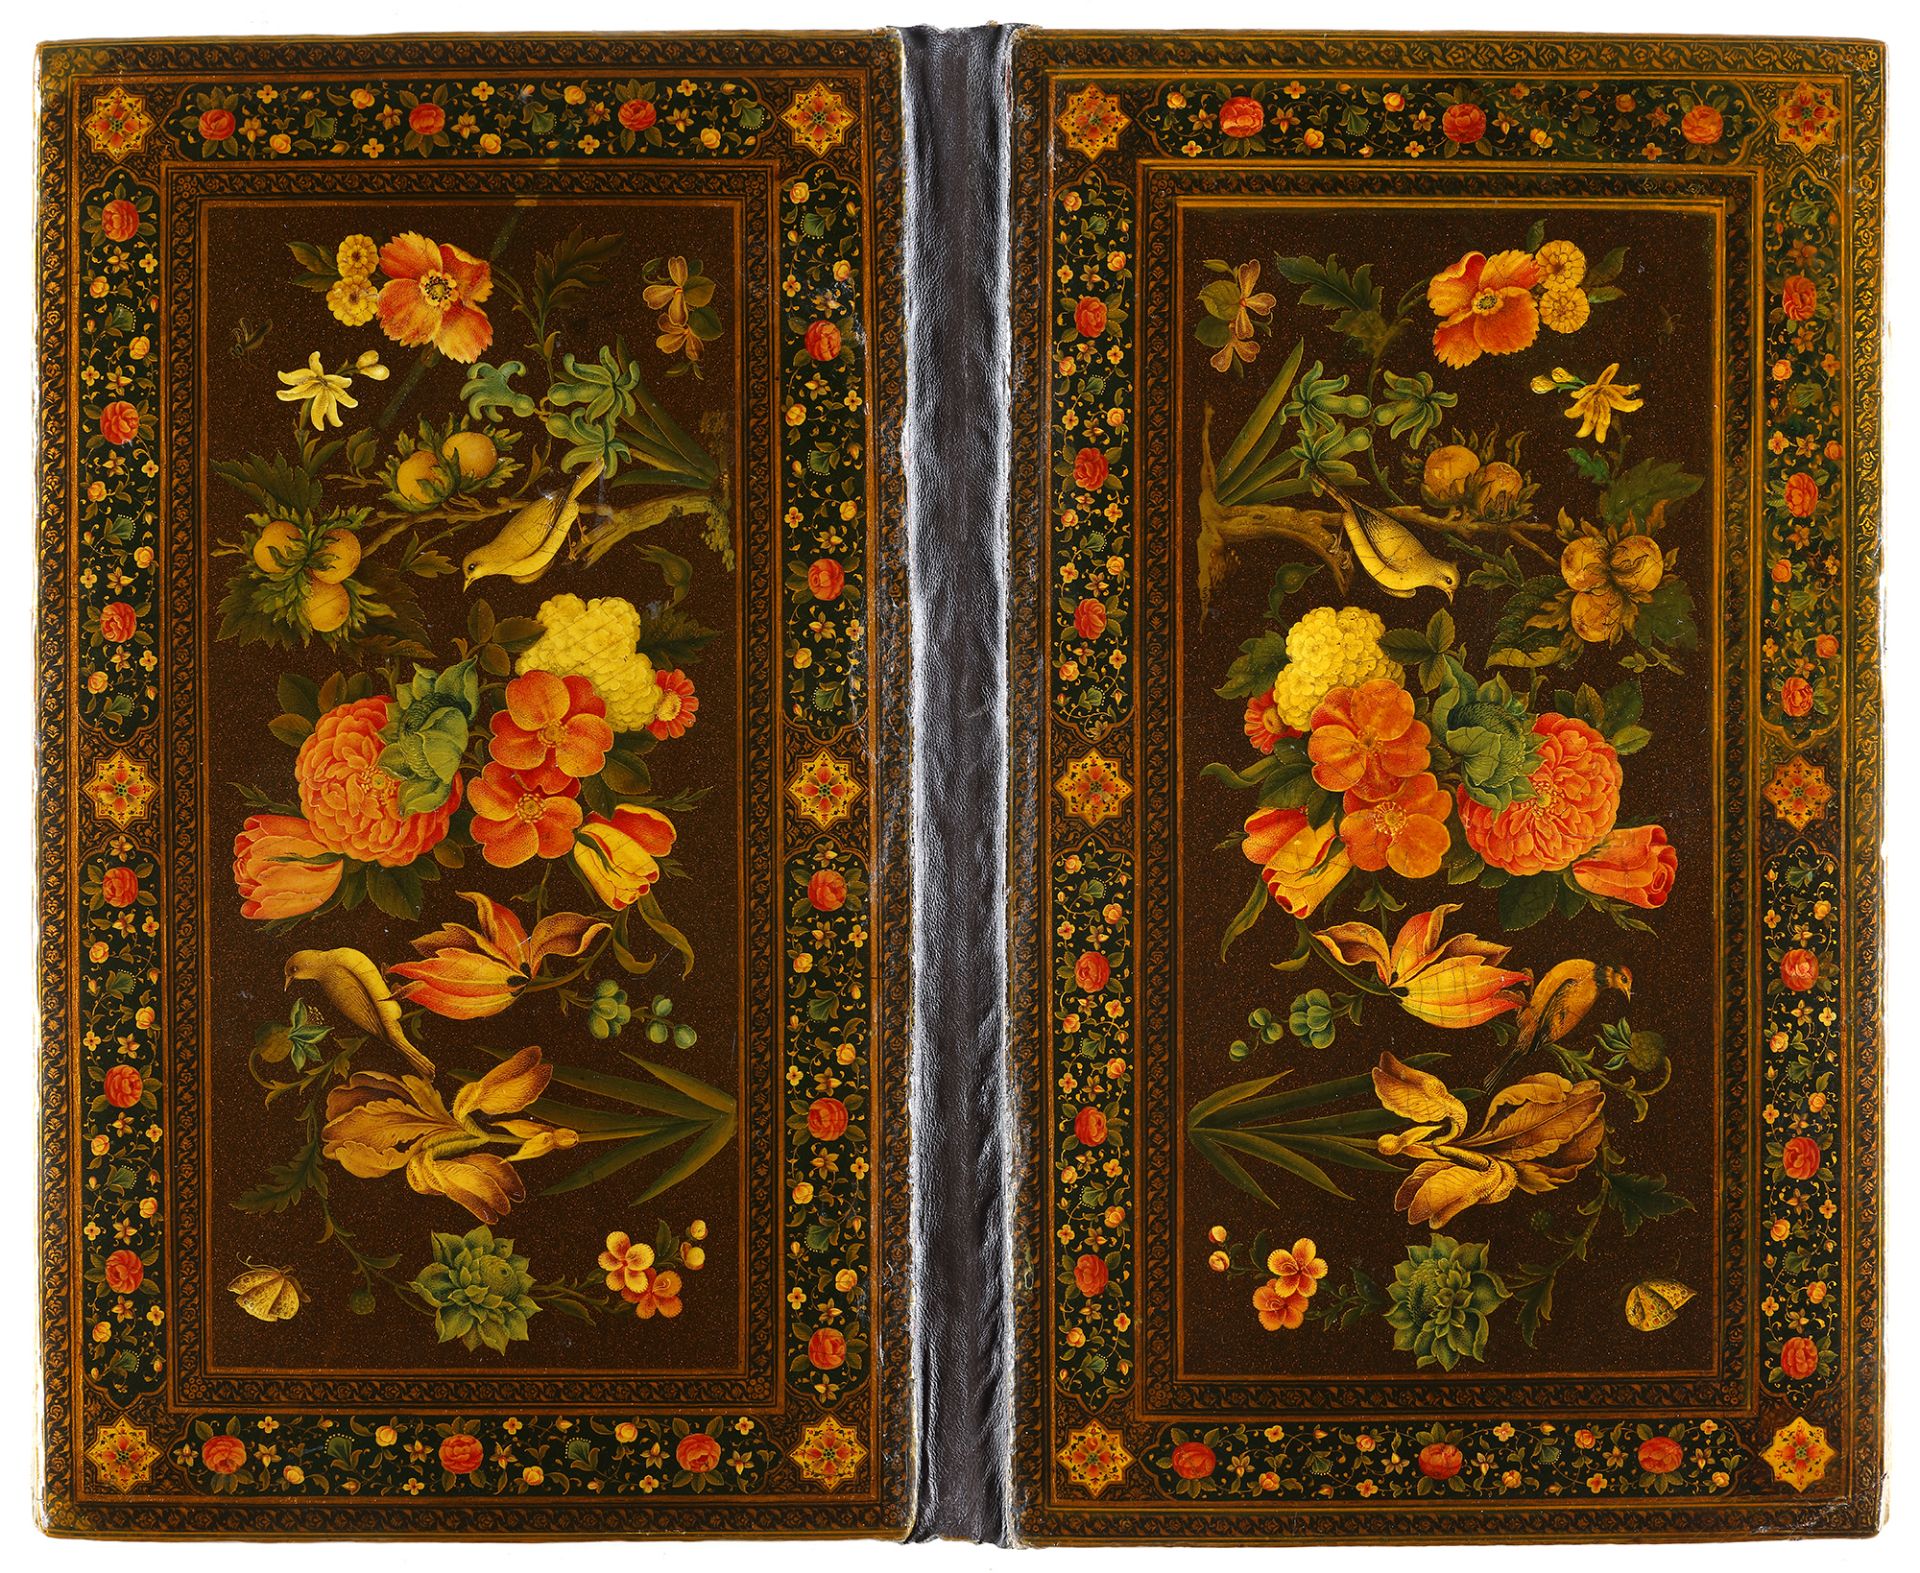 AN ILLUMINATED QURAN, PERSIA, LATE 19TH-EARLY 20TH CENTURY - Image 6 of 27